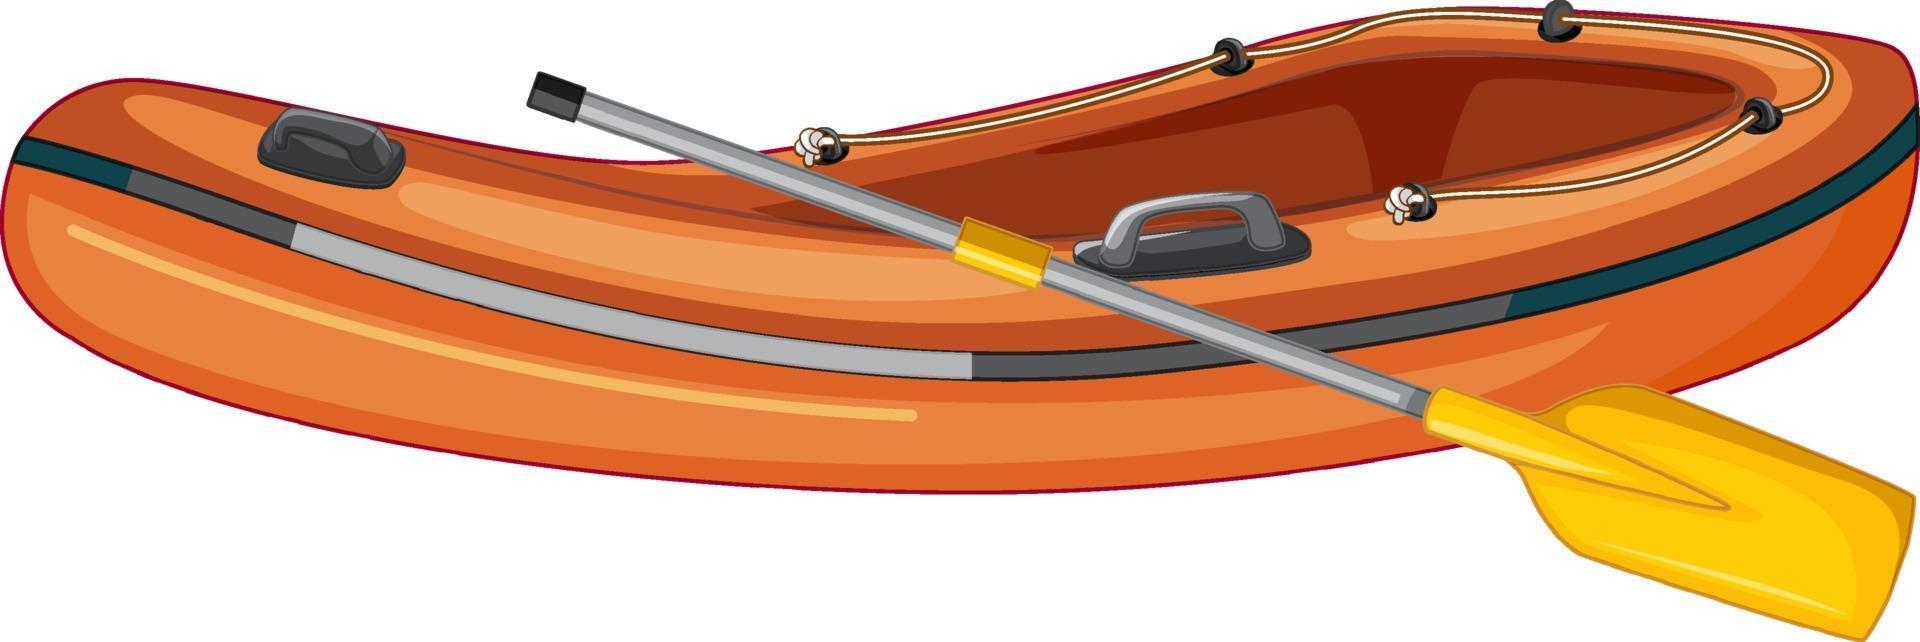 Inflatable boat with oars on white background vector